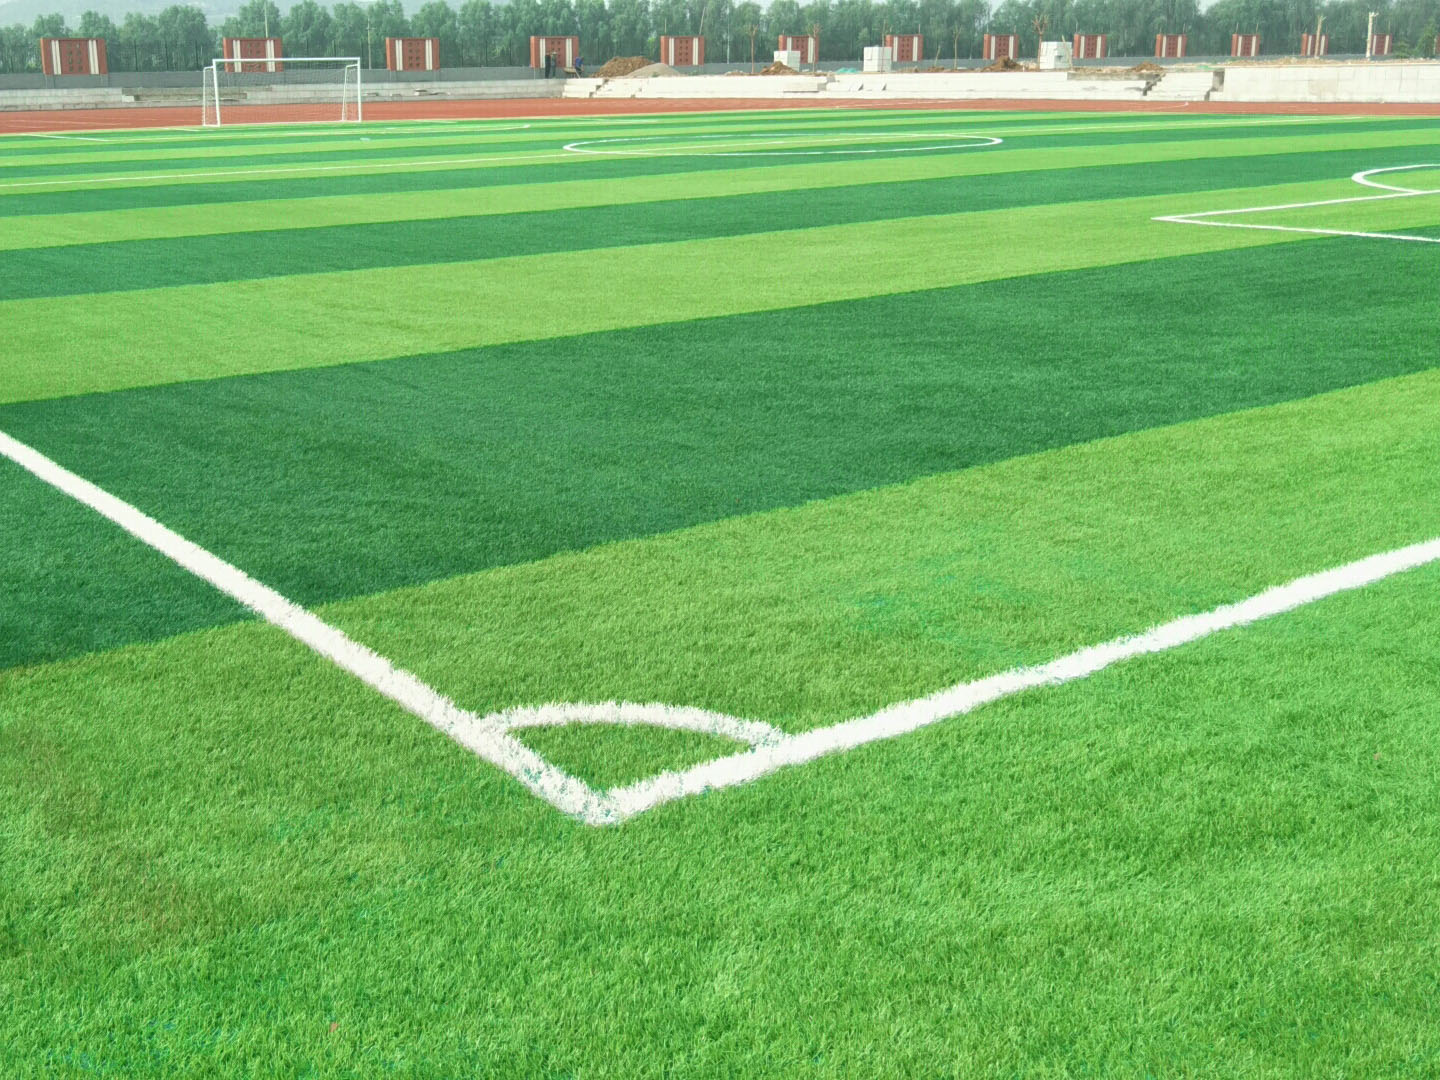 Frequently Asked Questions About Artificial Grass